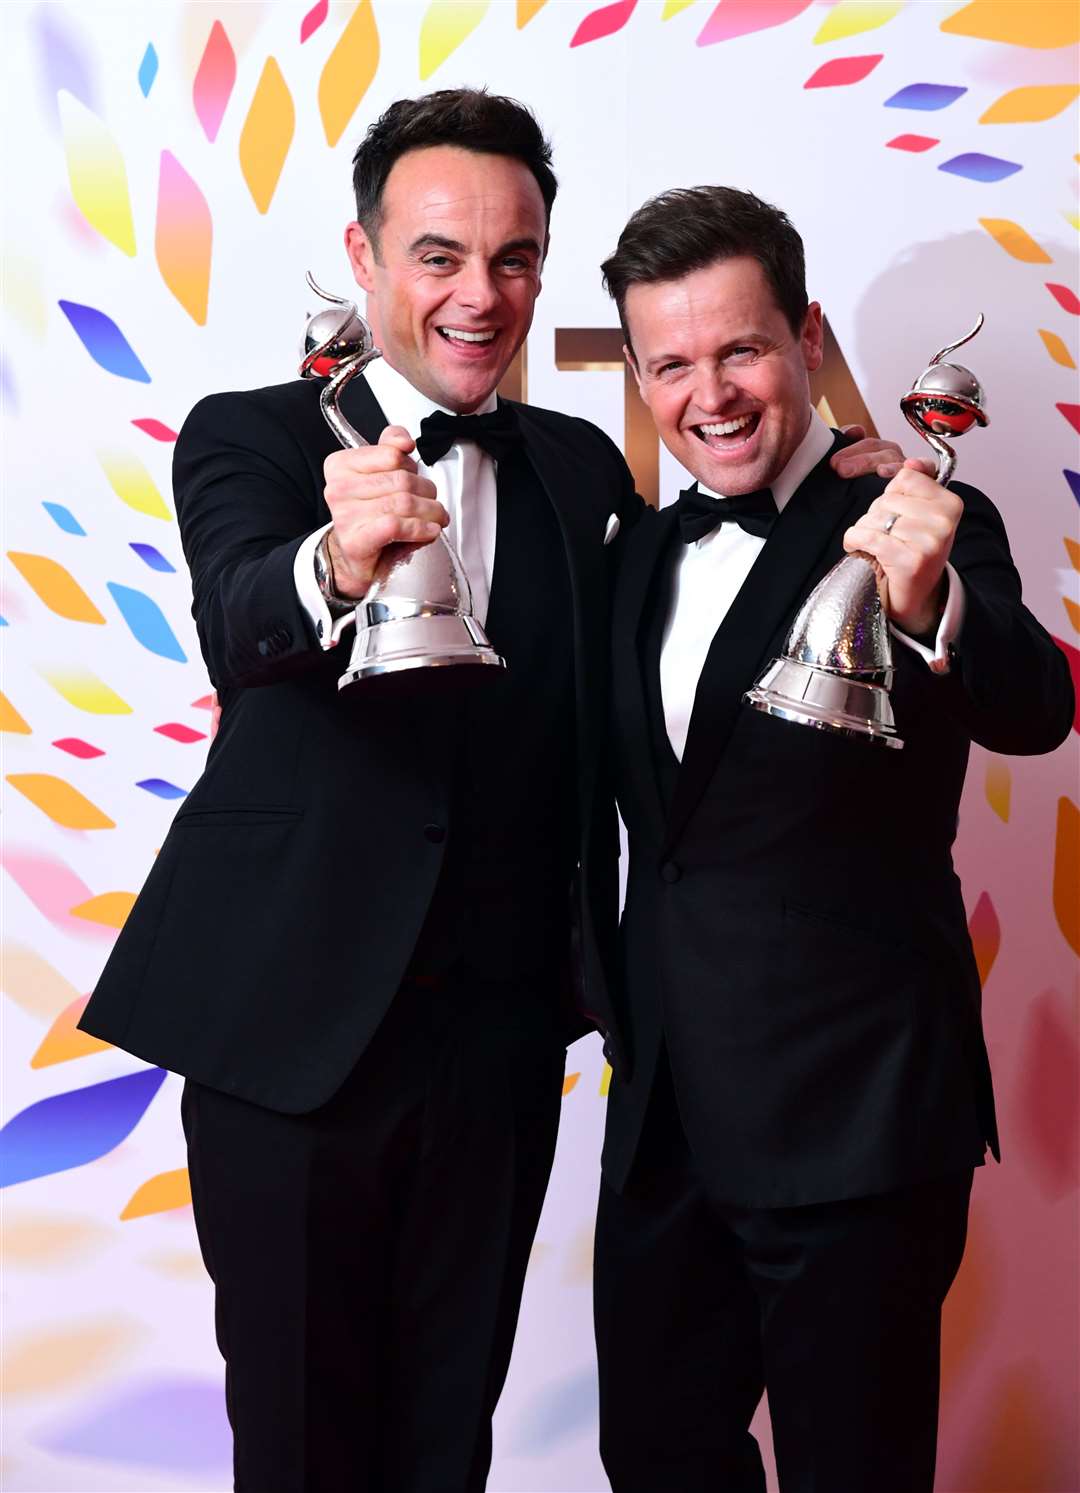 Anthony McPartlin and Declan Donnelly have won the prize 21 years in a row (Ian West/PA)